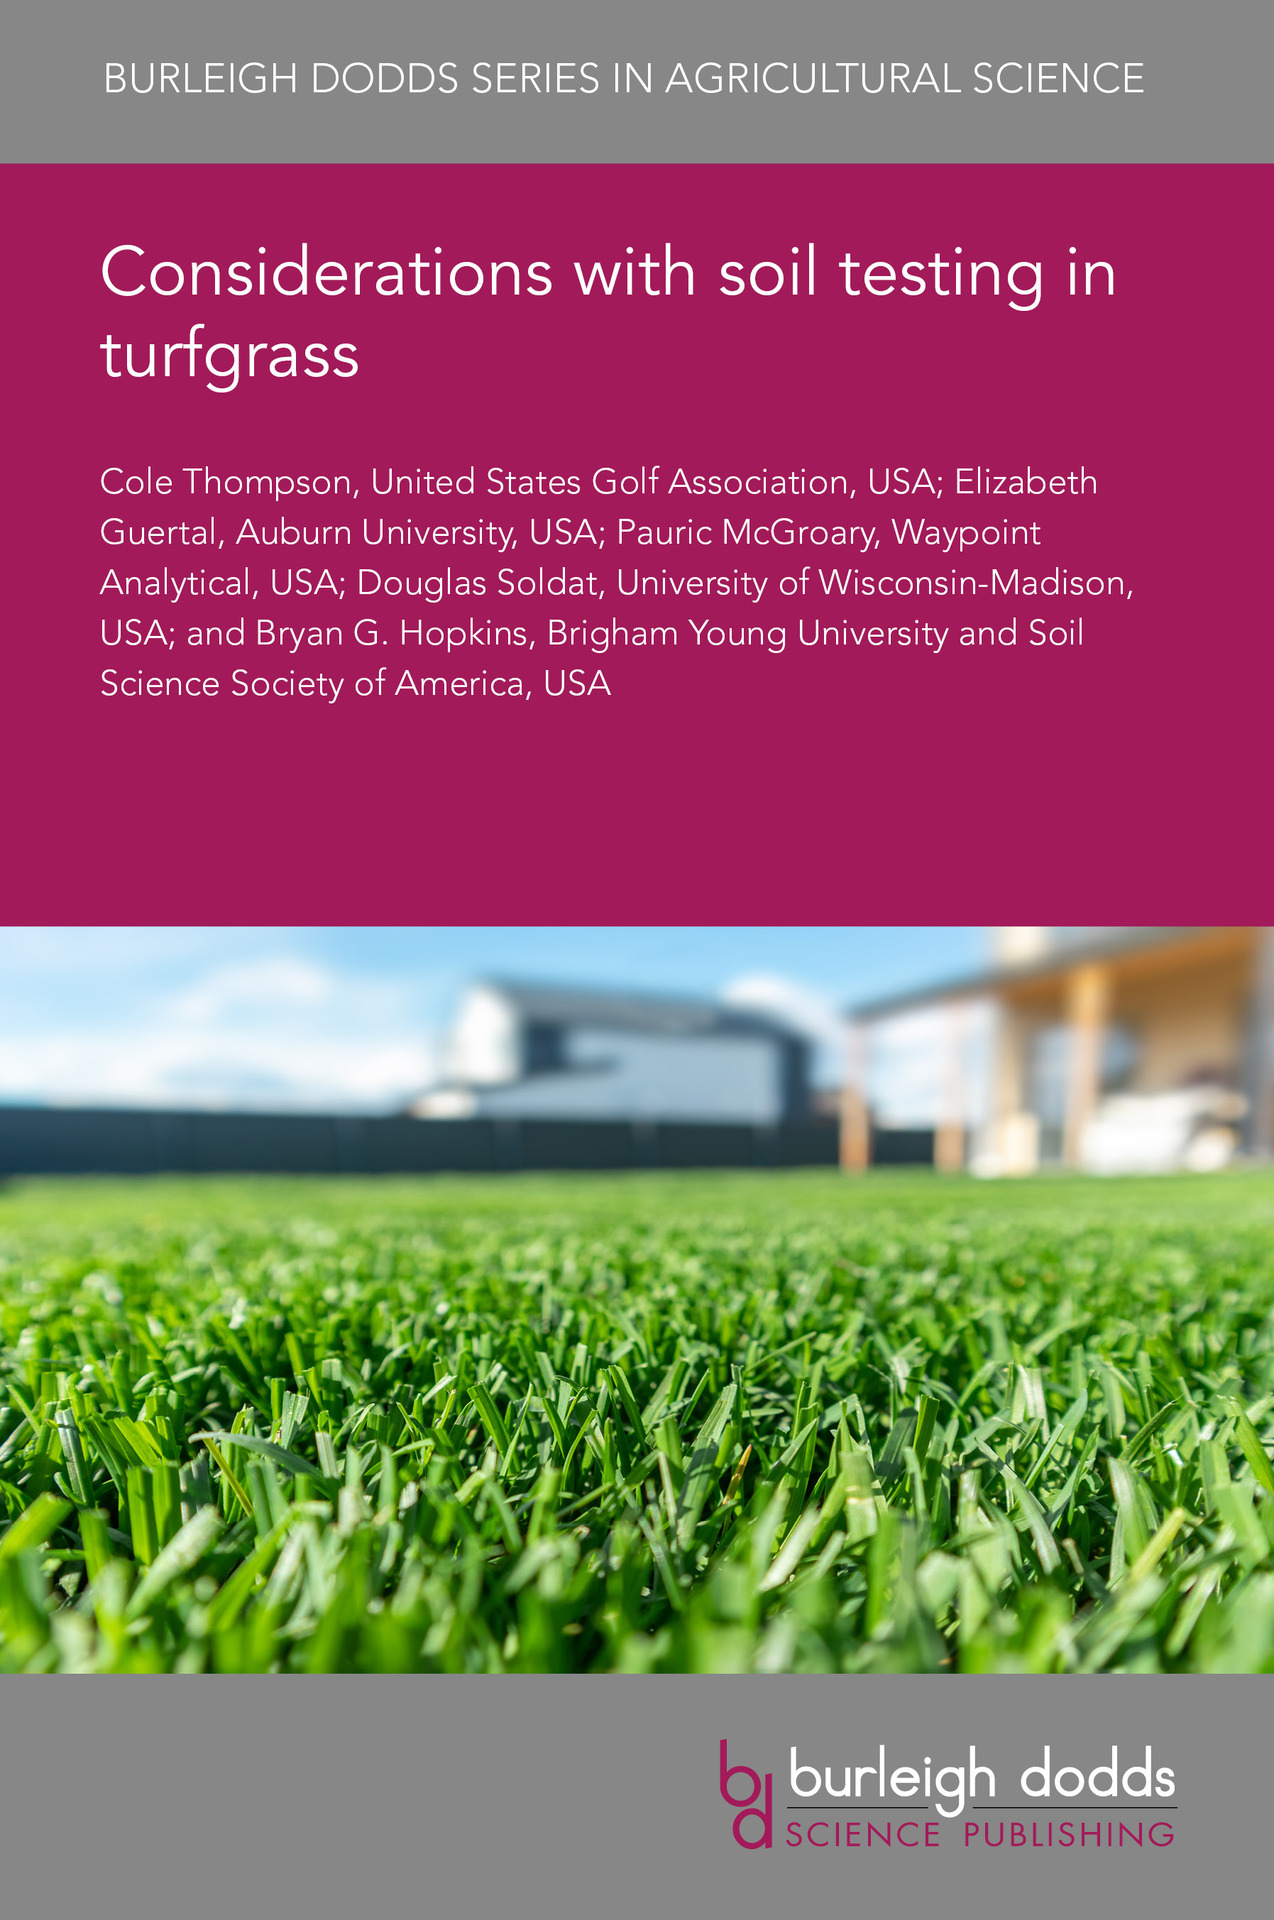 Cover image of book chapter - close up image of turfgrass